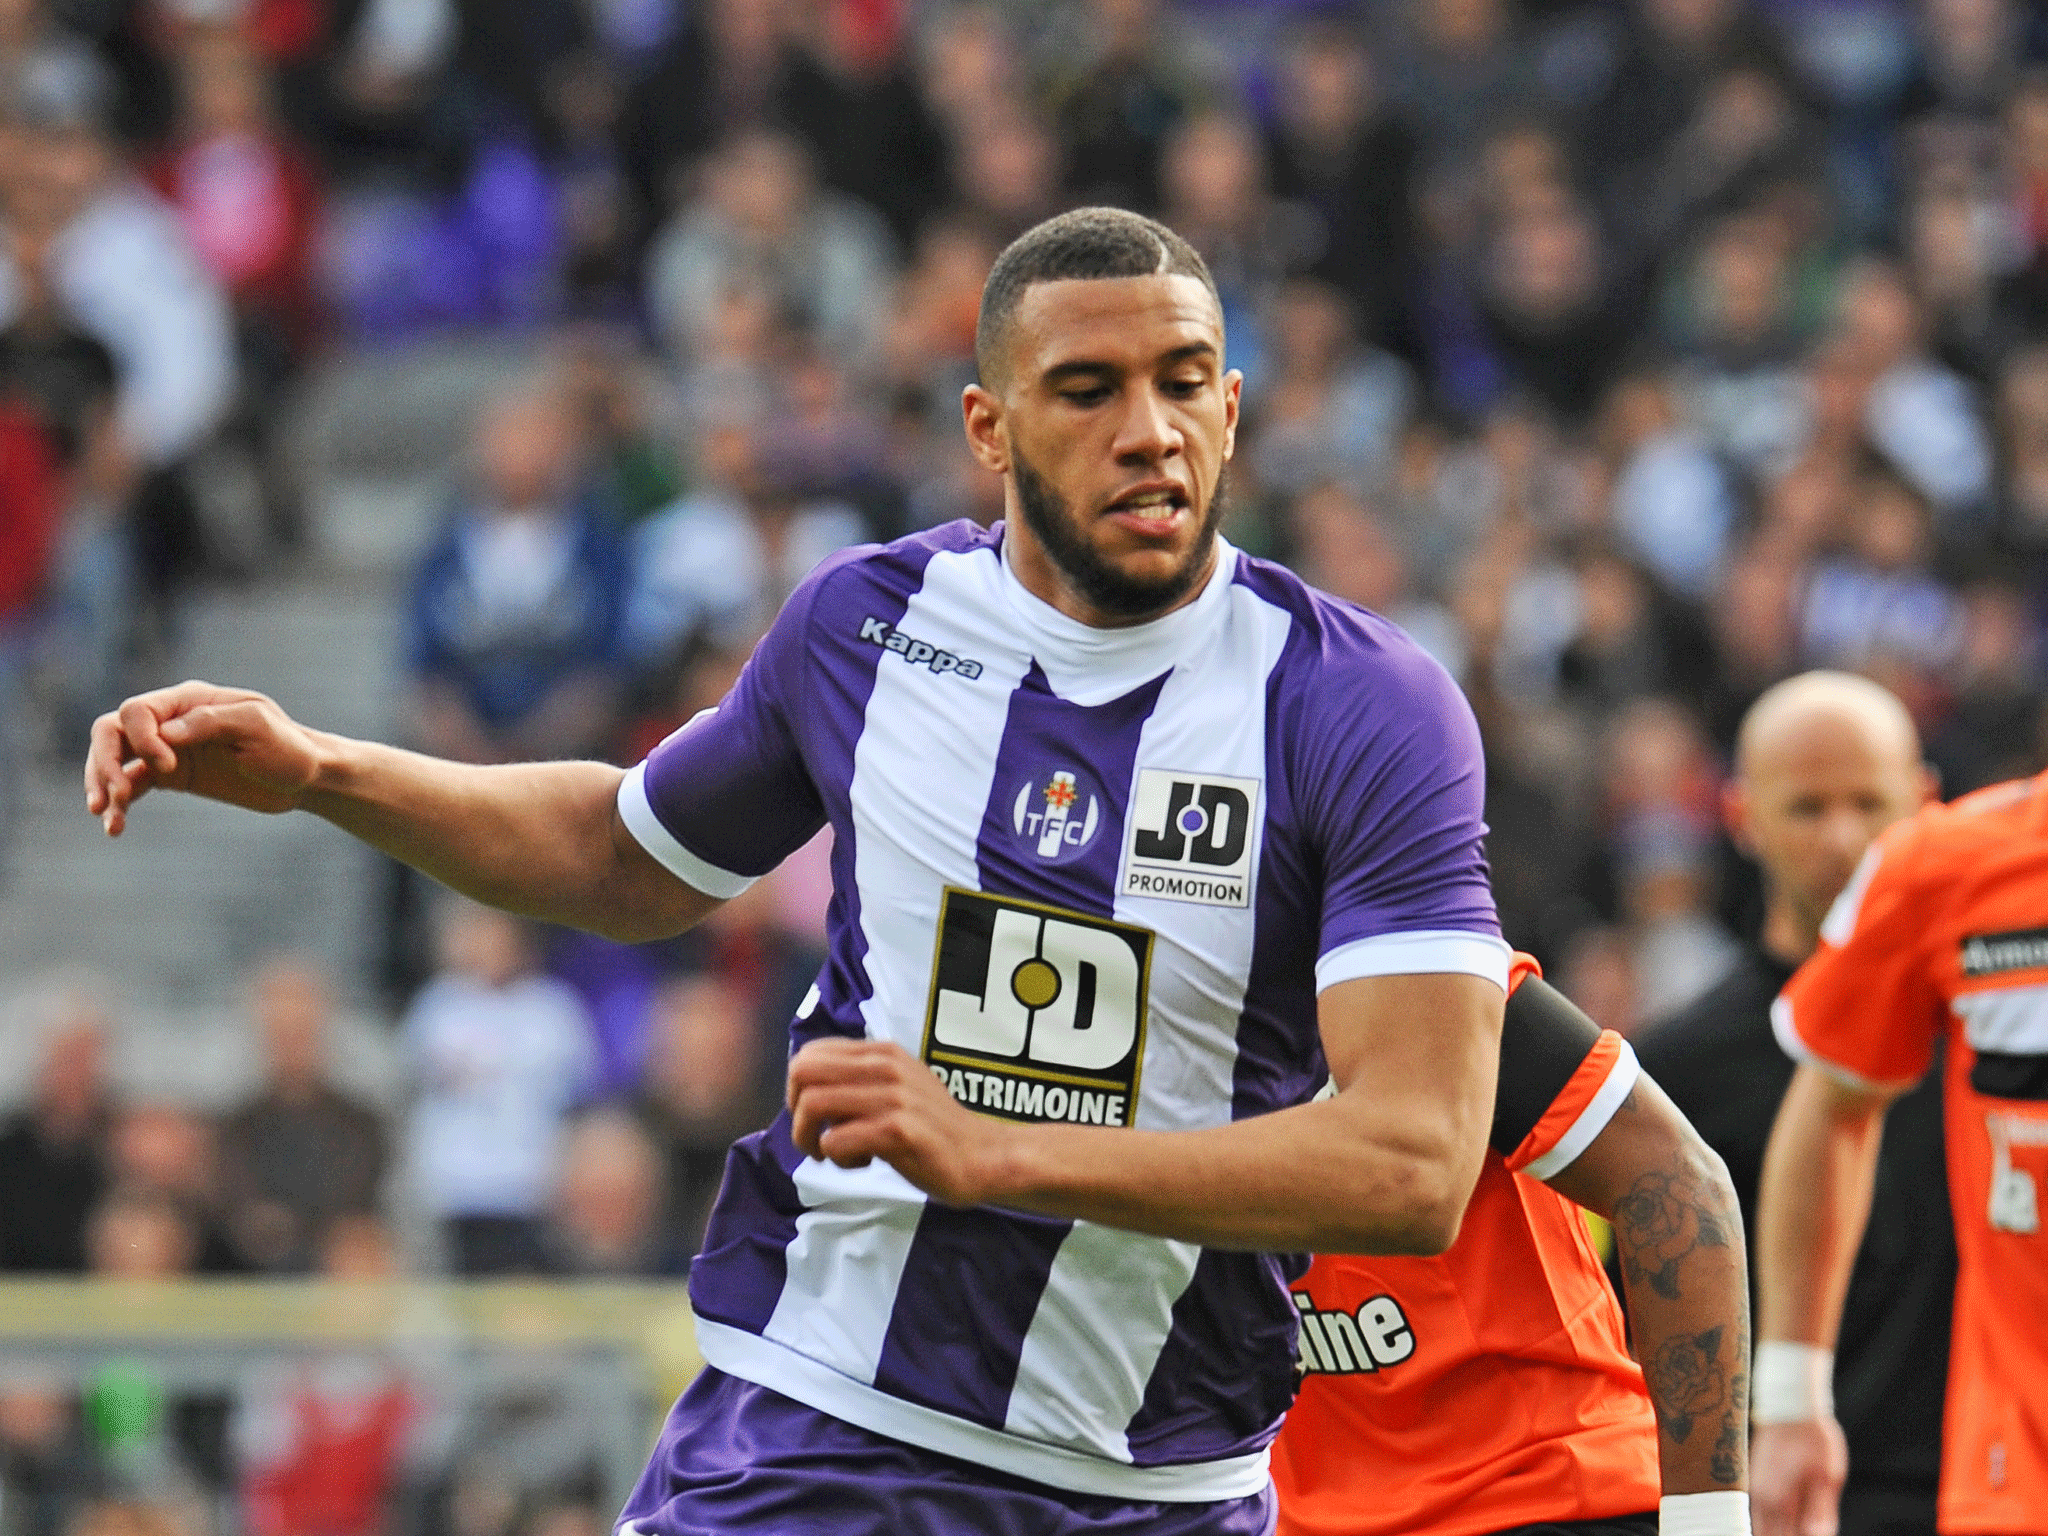 Etienne Capoue signed for Tottenham from Toulouse today